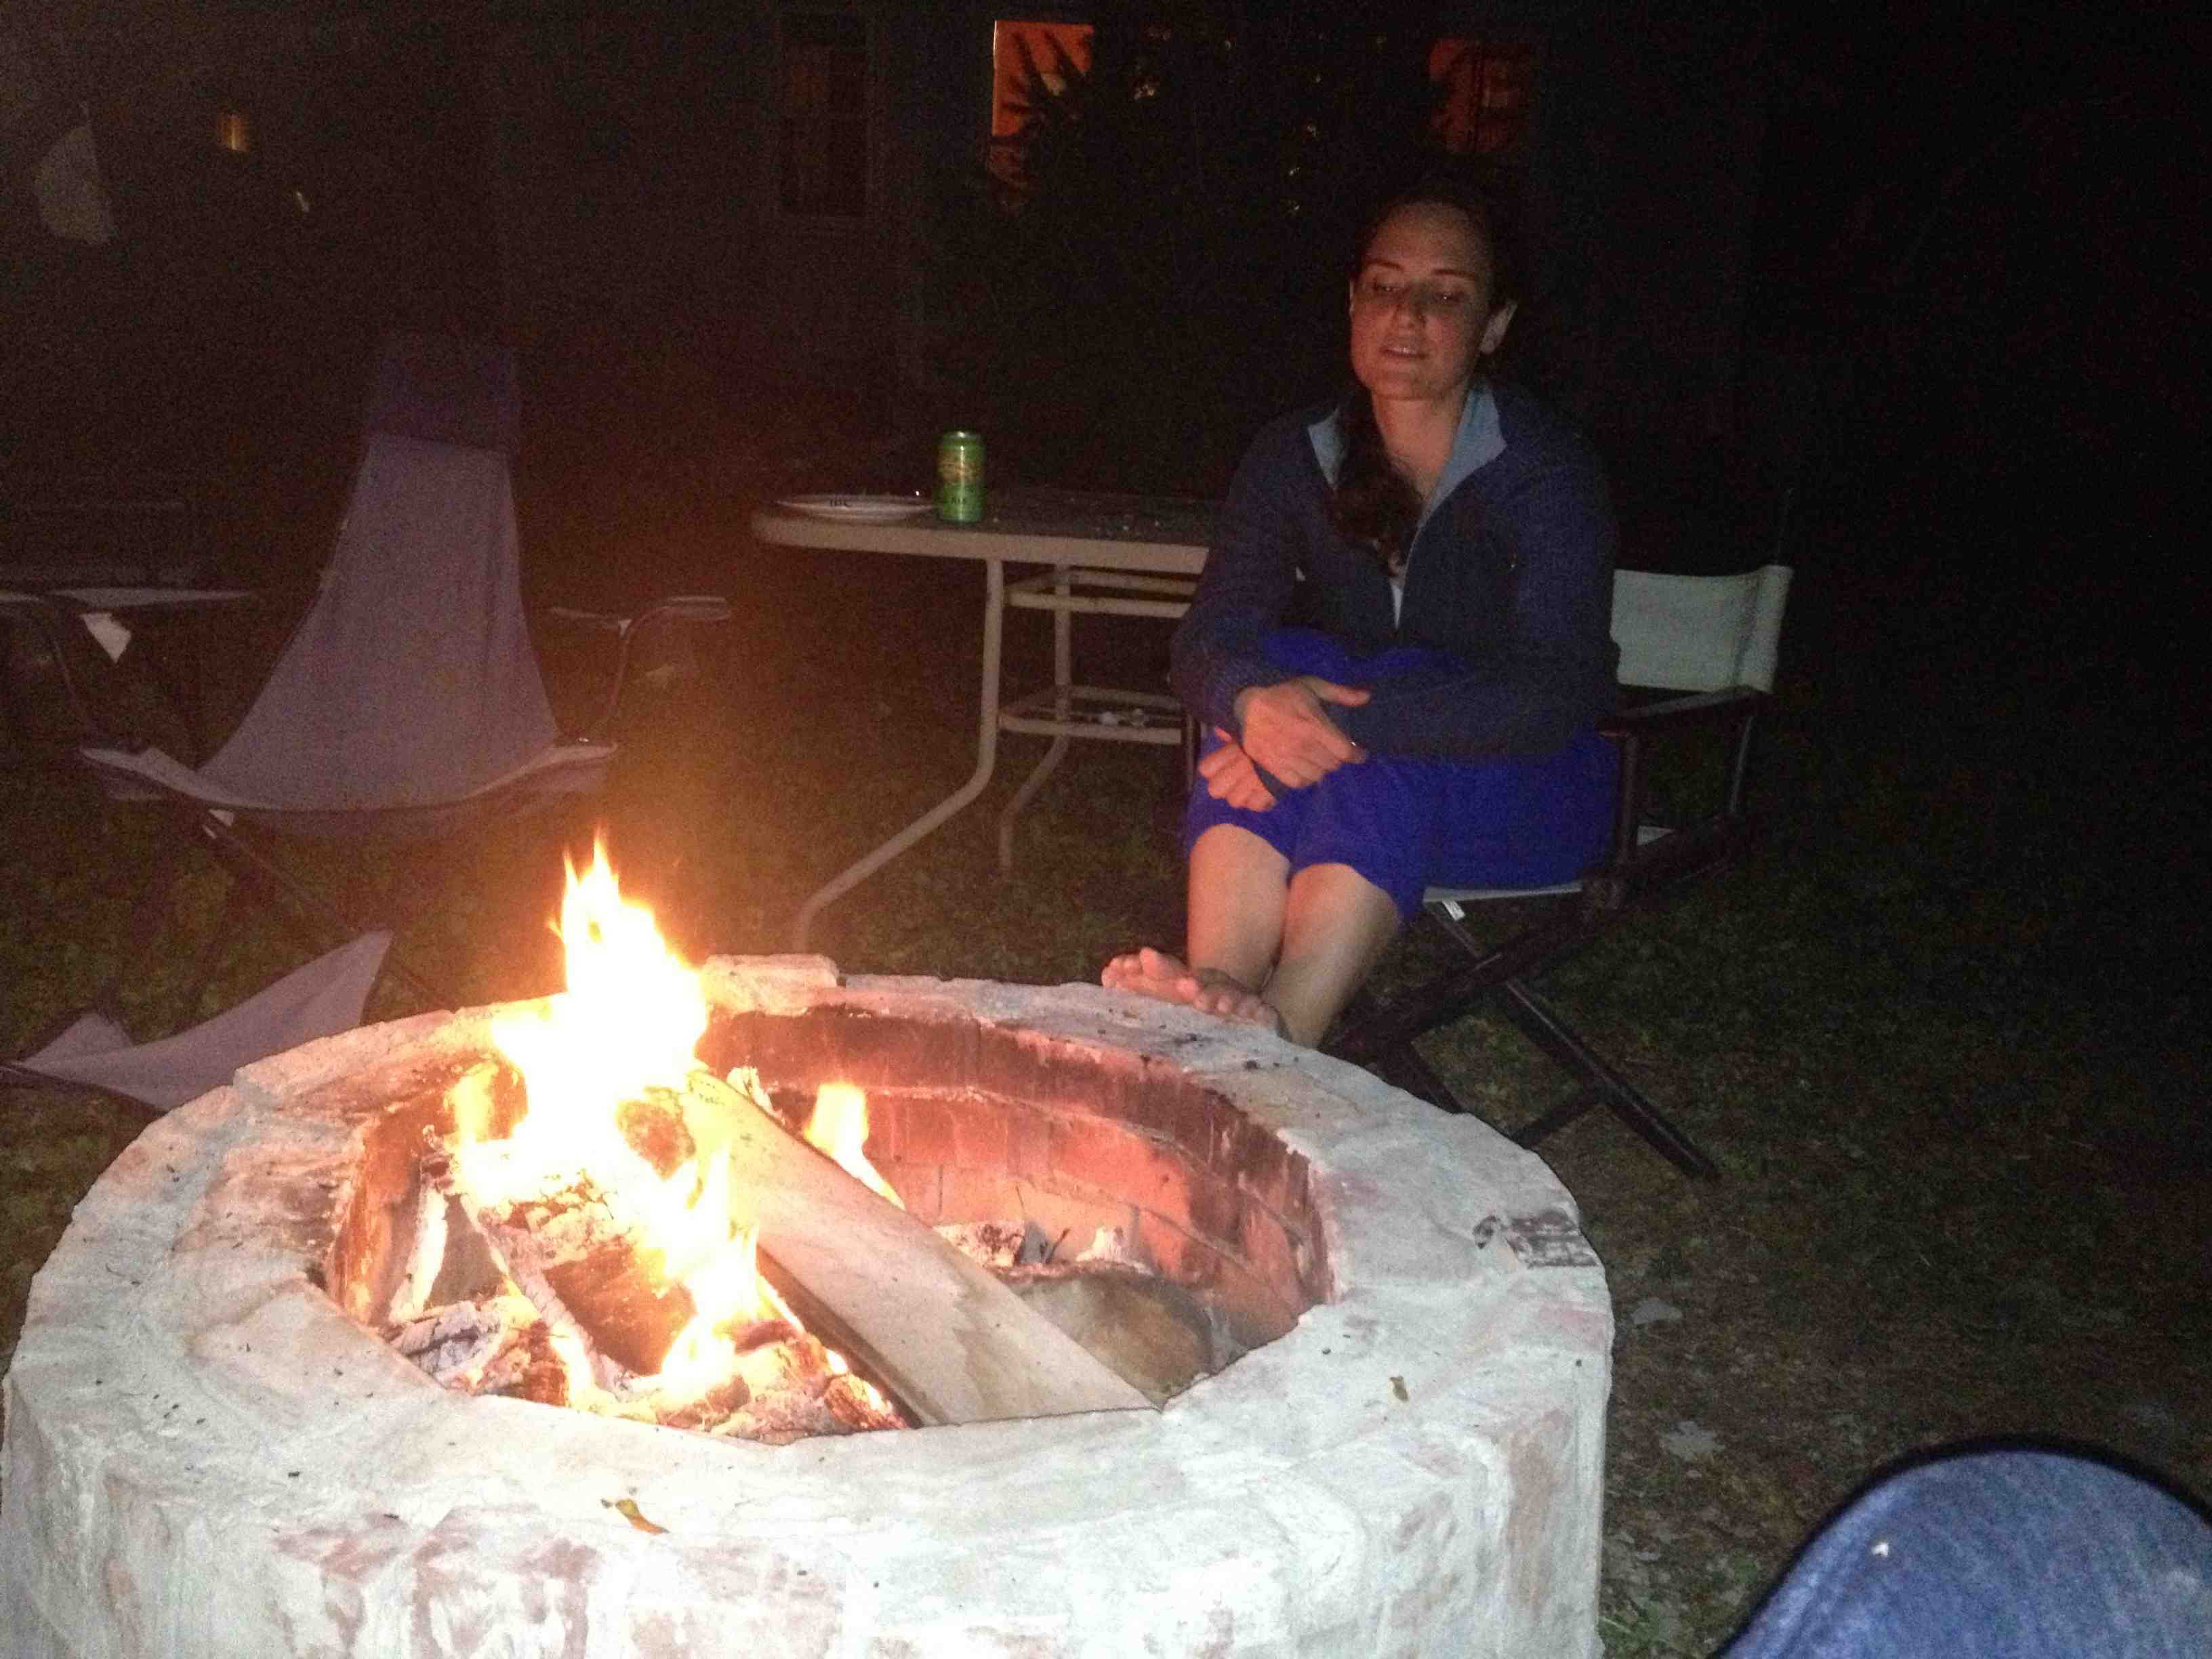 Kate tests the fire pit